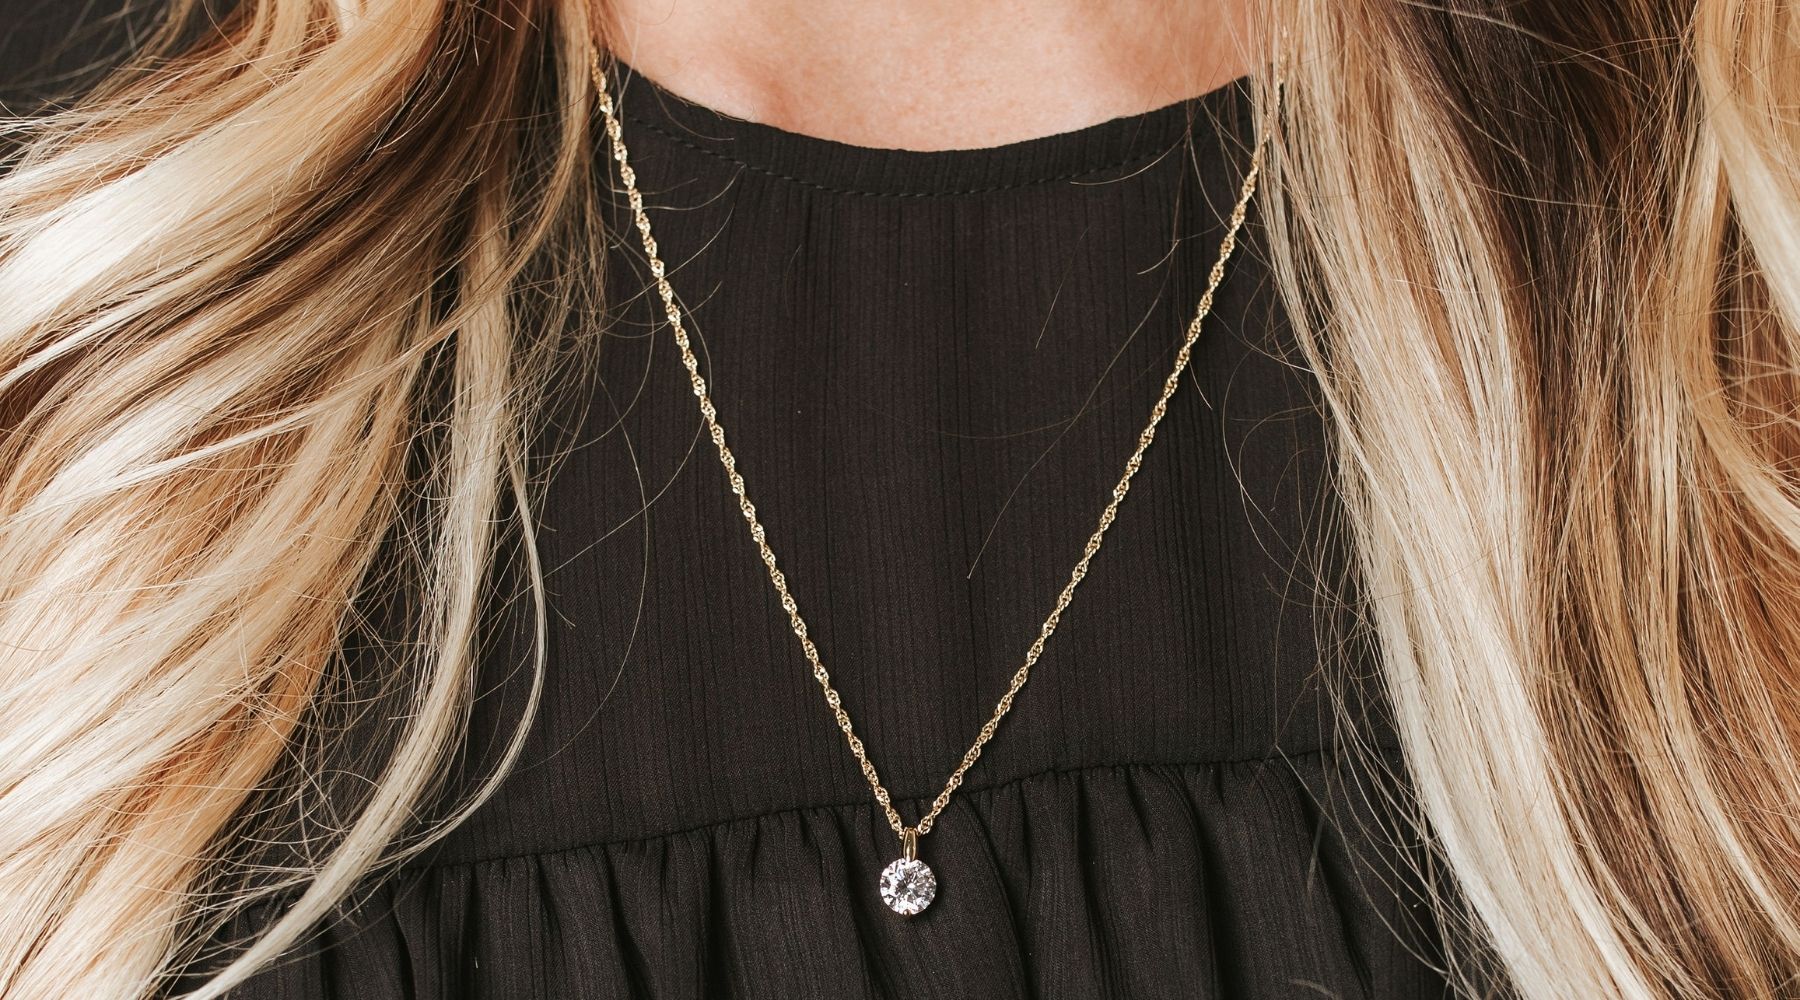 How to wear necklaces with a square neckline? For this type of style the  short necklaces are the best with long earrings…